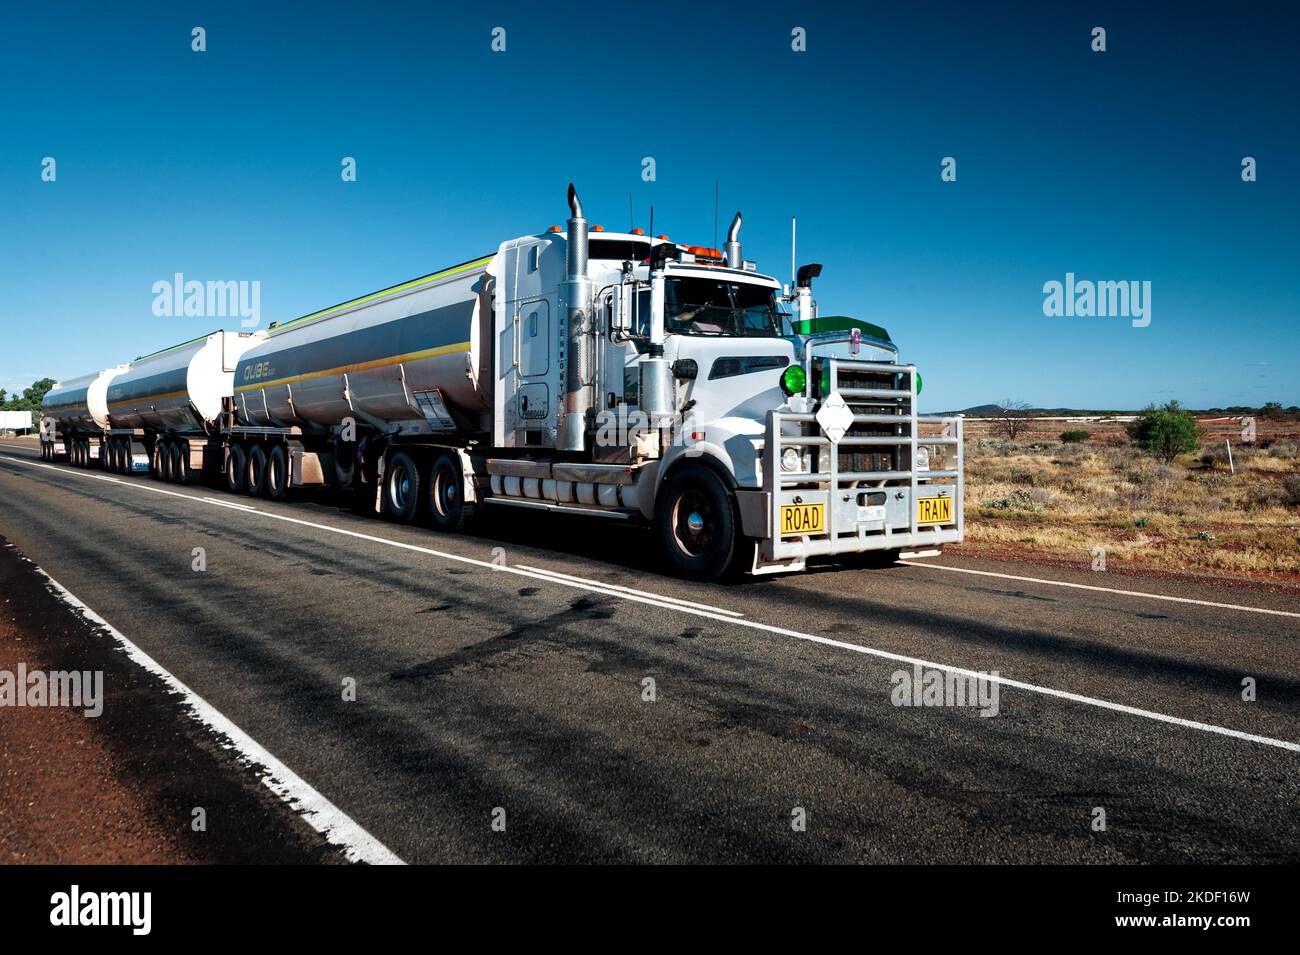 Road Train on an outback highway. Stock Photo